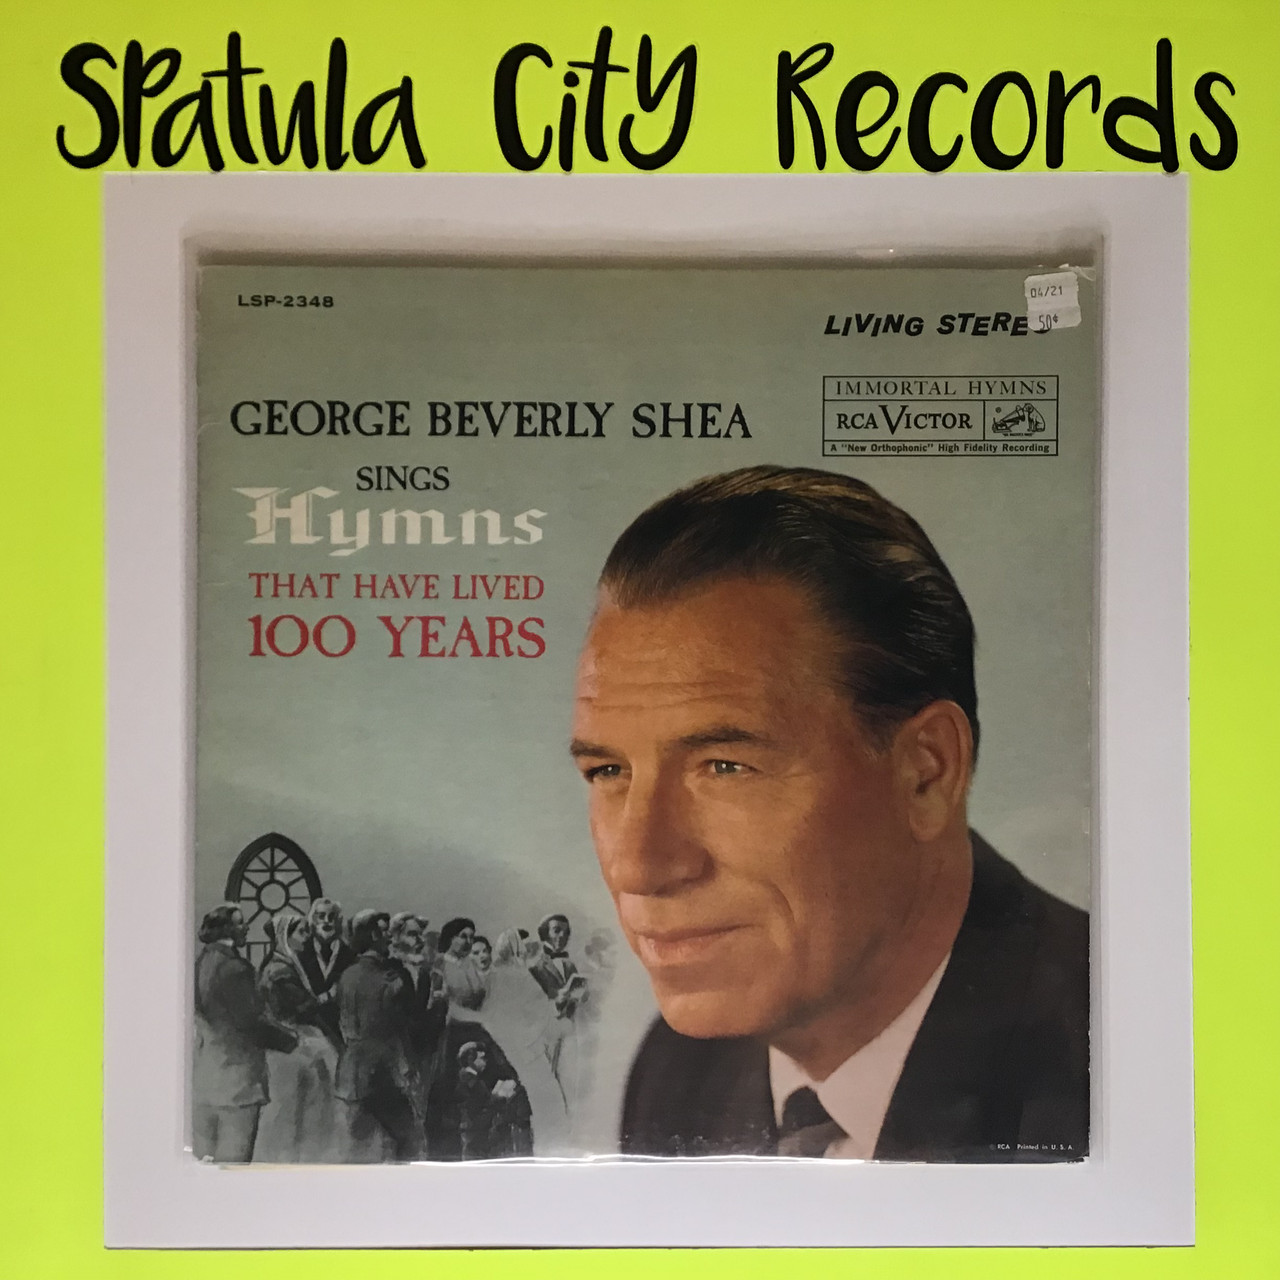 George Beverly Shea - Sings Hymns that have lived 100 years - vinyl record album LP